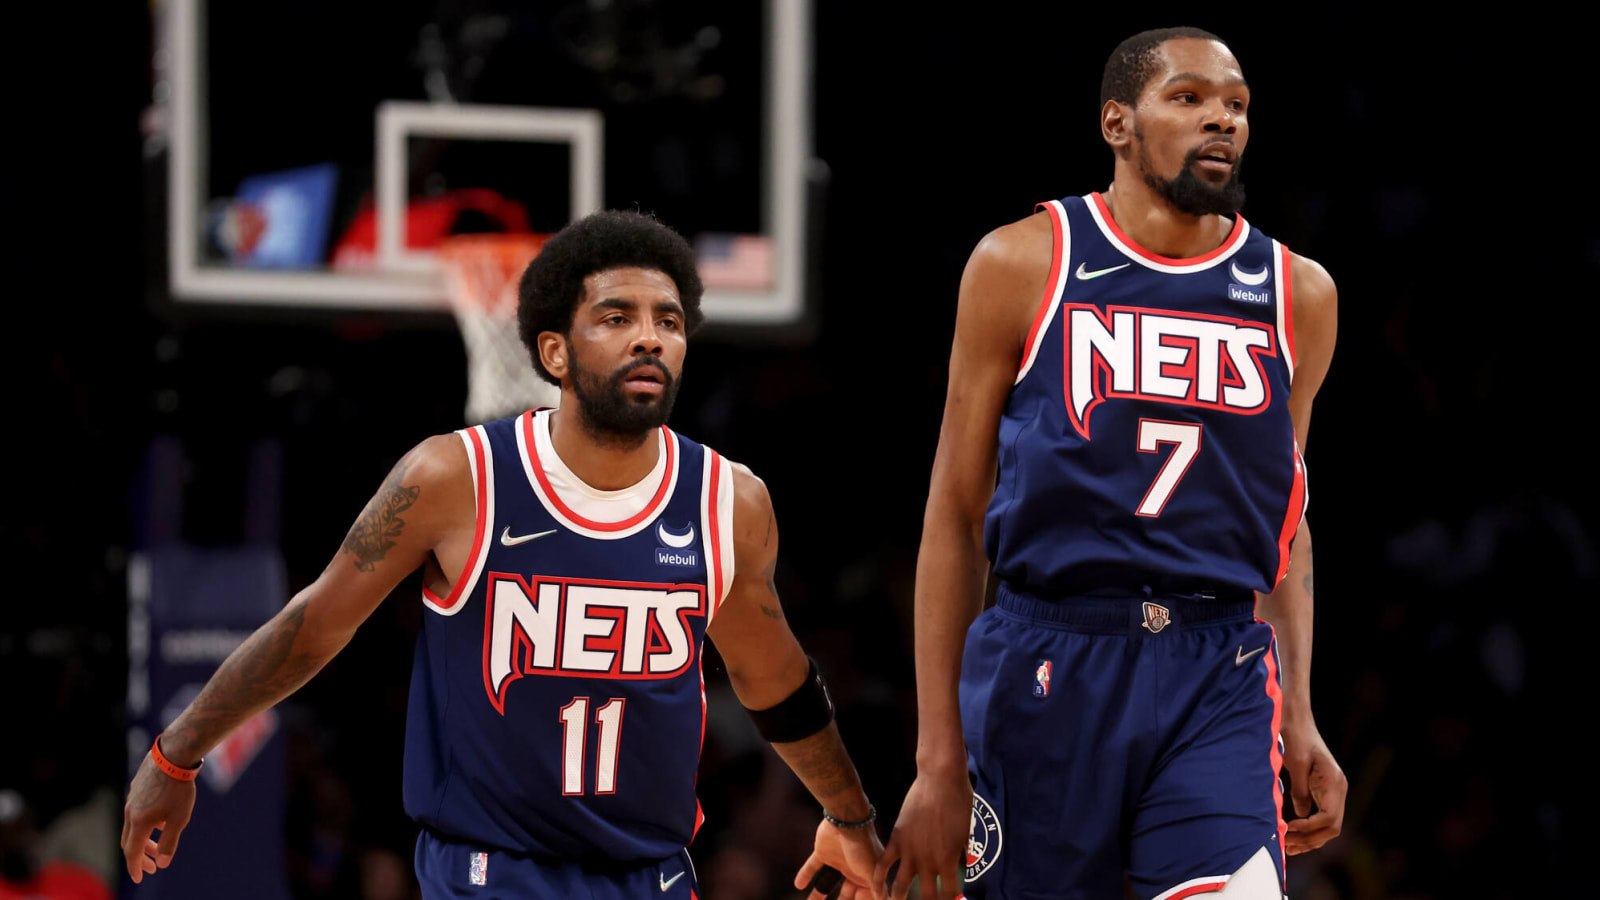 NBA insider: Nets' ultimate goal is bringing back Kevin Durant and Kyrie Irving